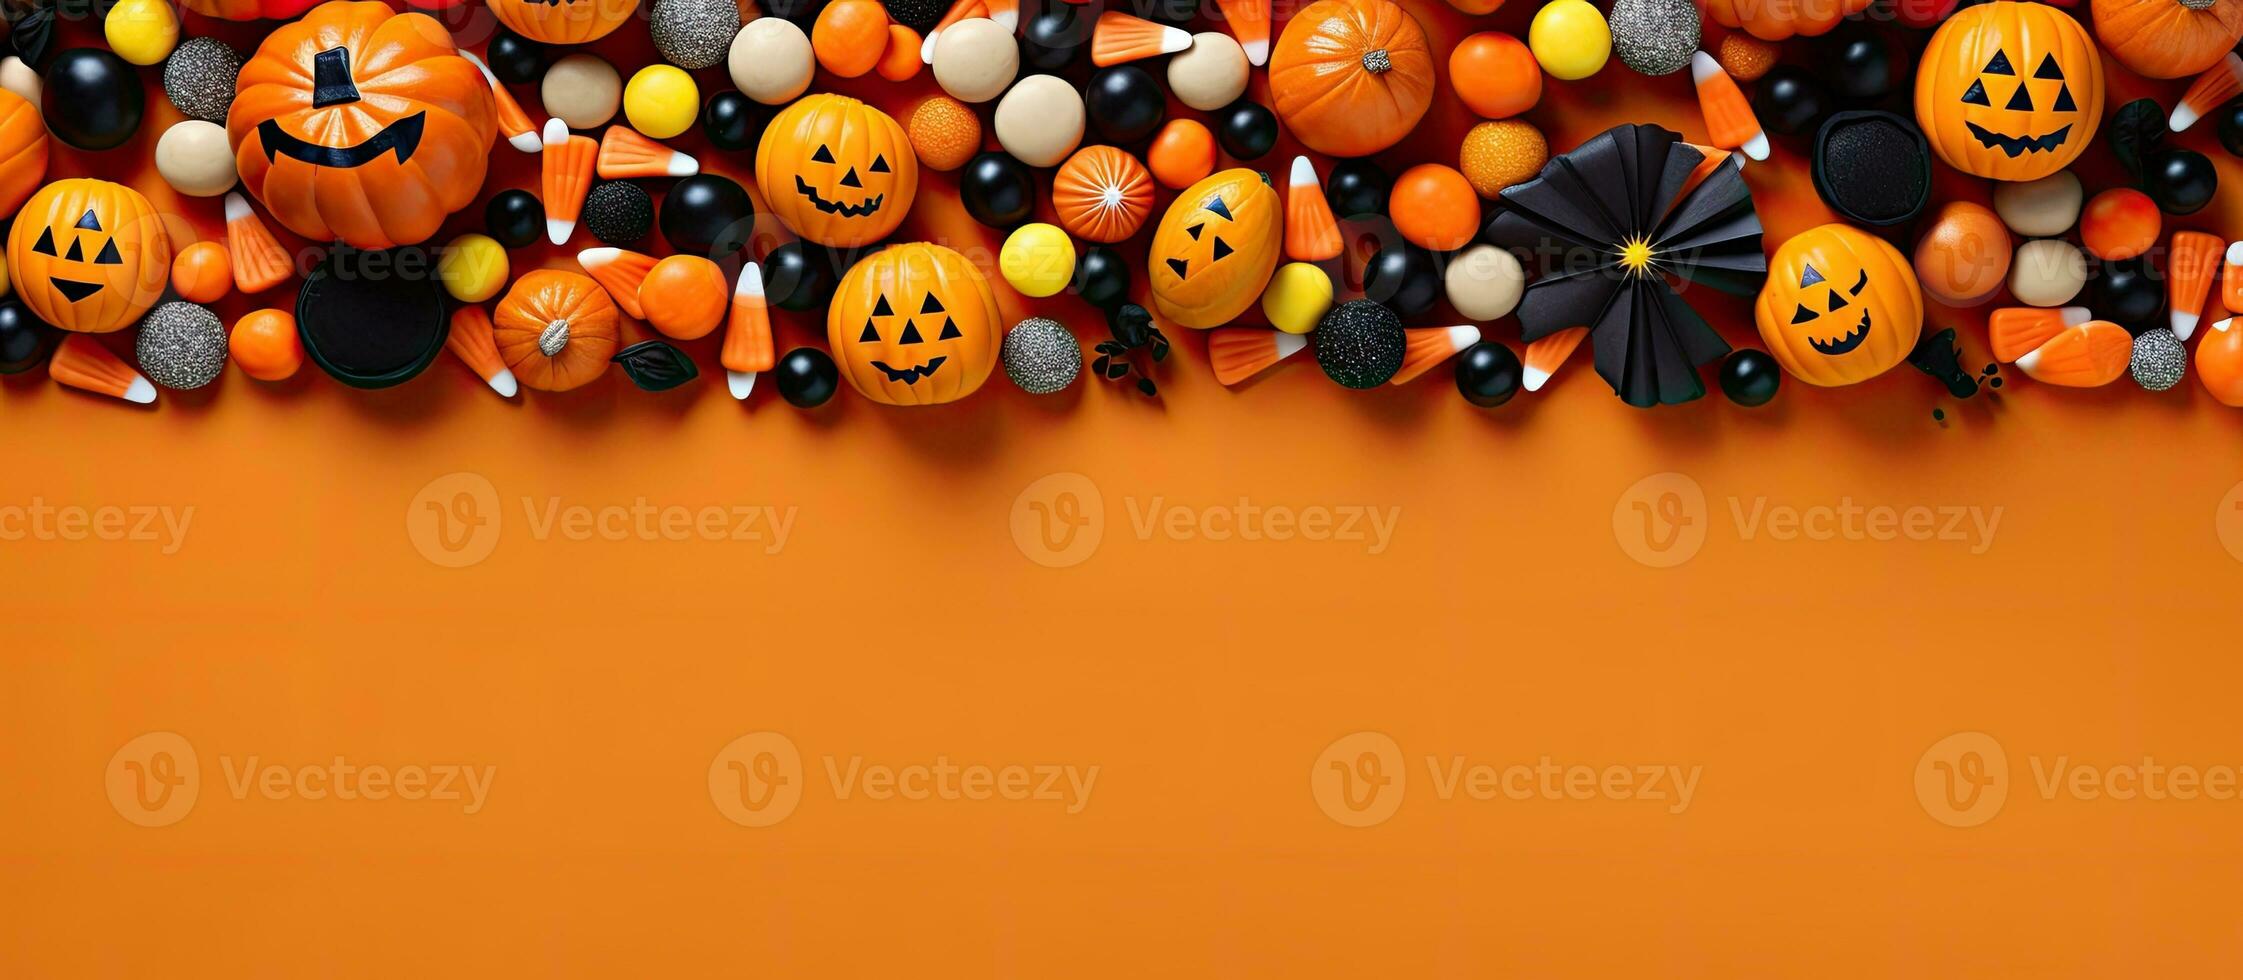 Scattered candy and decorations on Halloween themed border seen from above over orange banner photo